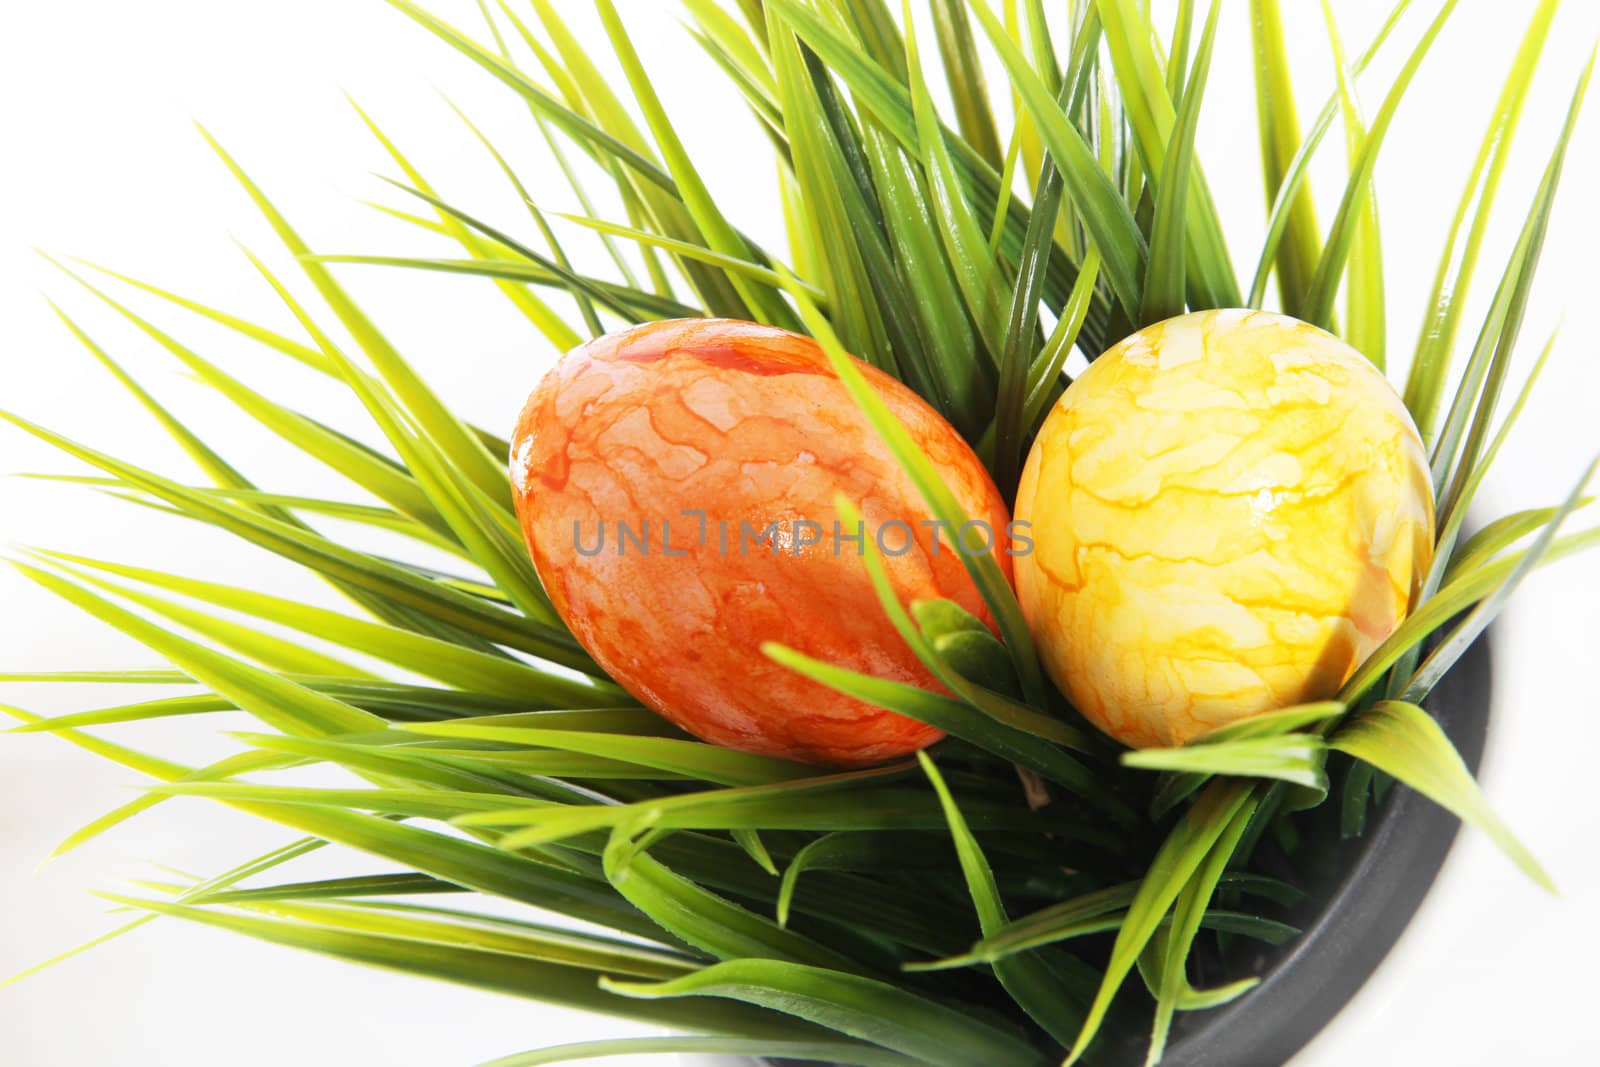 Orange and yellow marbled Easter Eggs nestling on top of a tuft of green grass growing in a pot, high angle view isolated on white